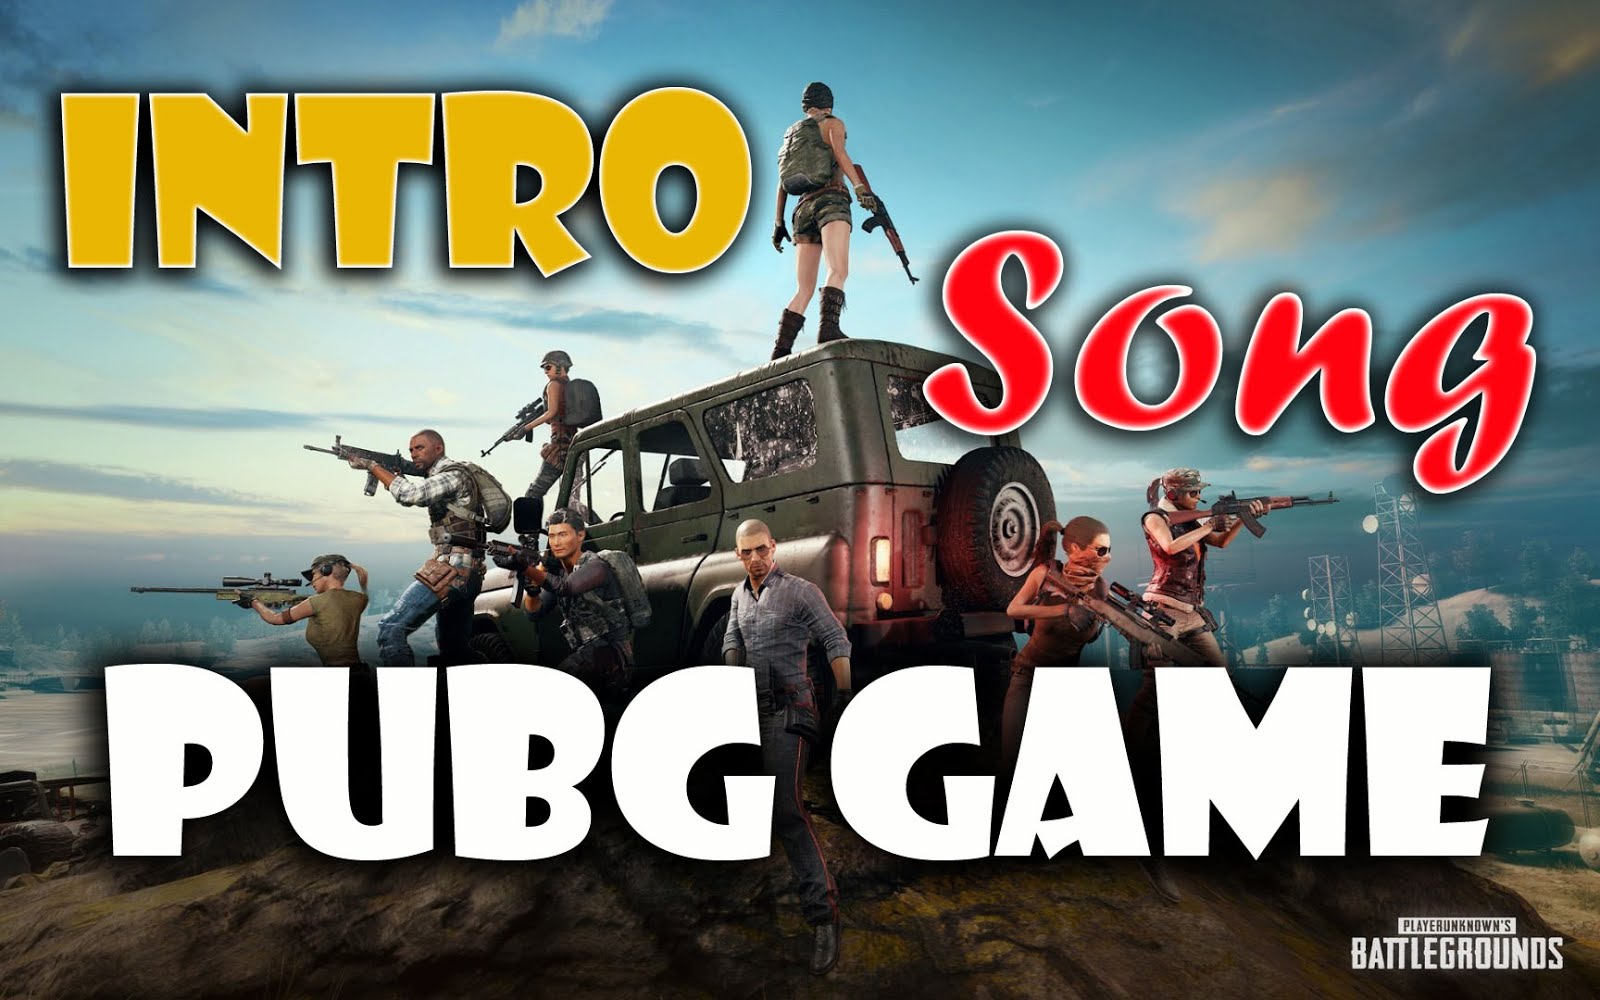 INTRO SONG PUBG GAME